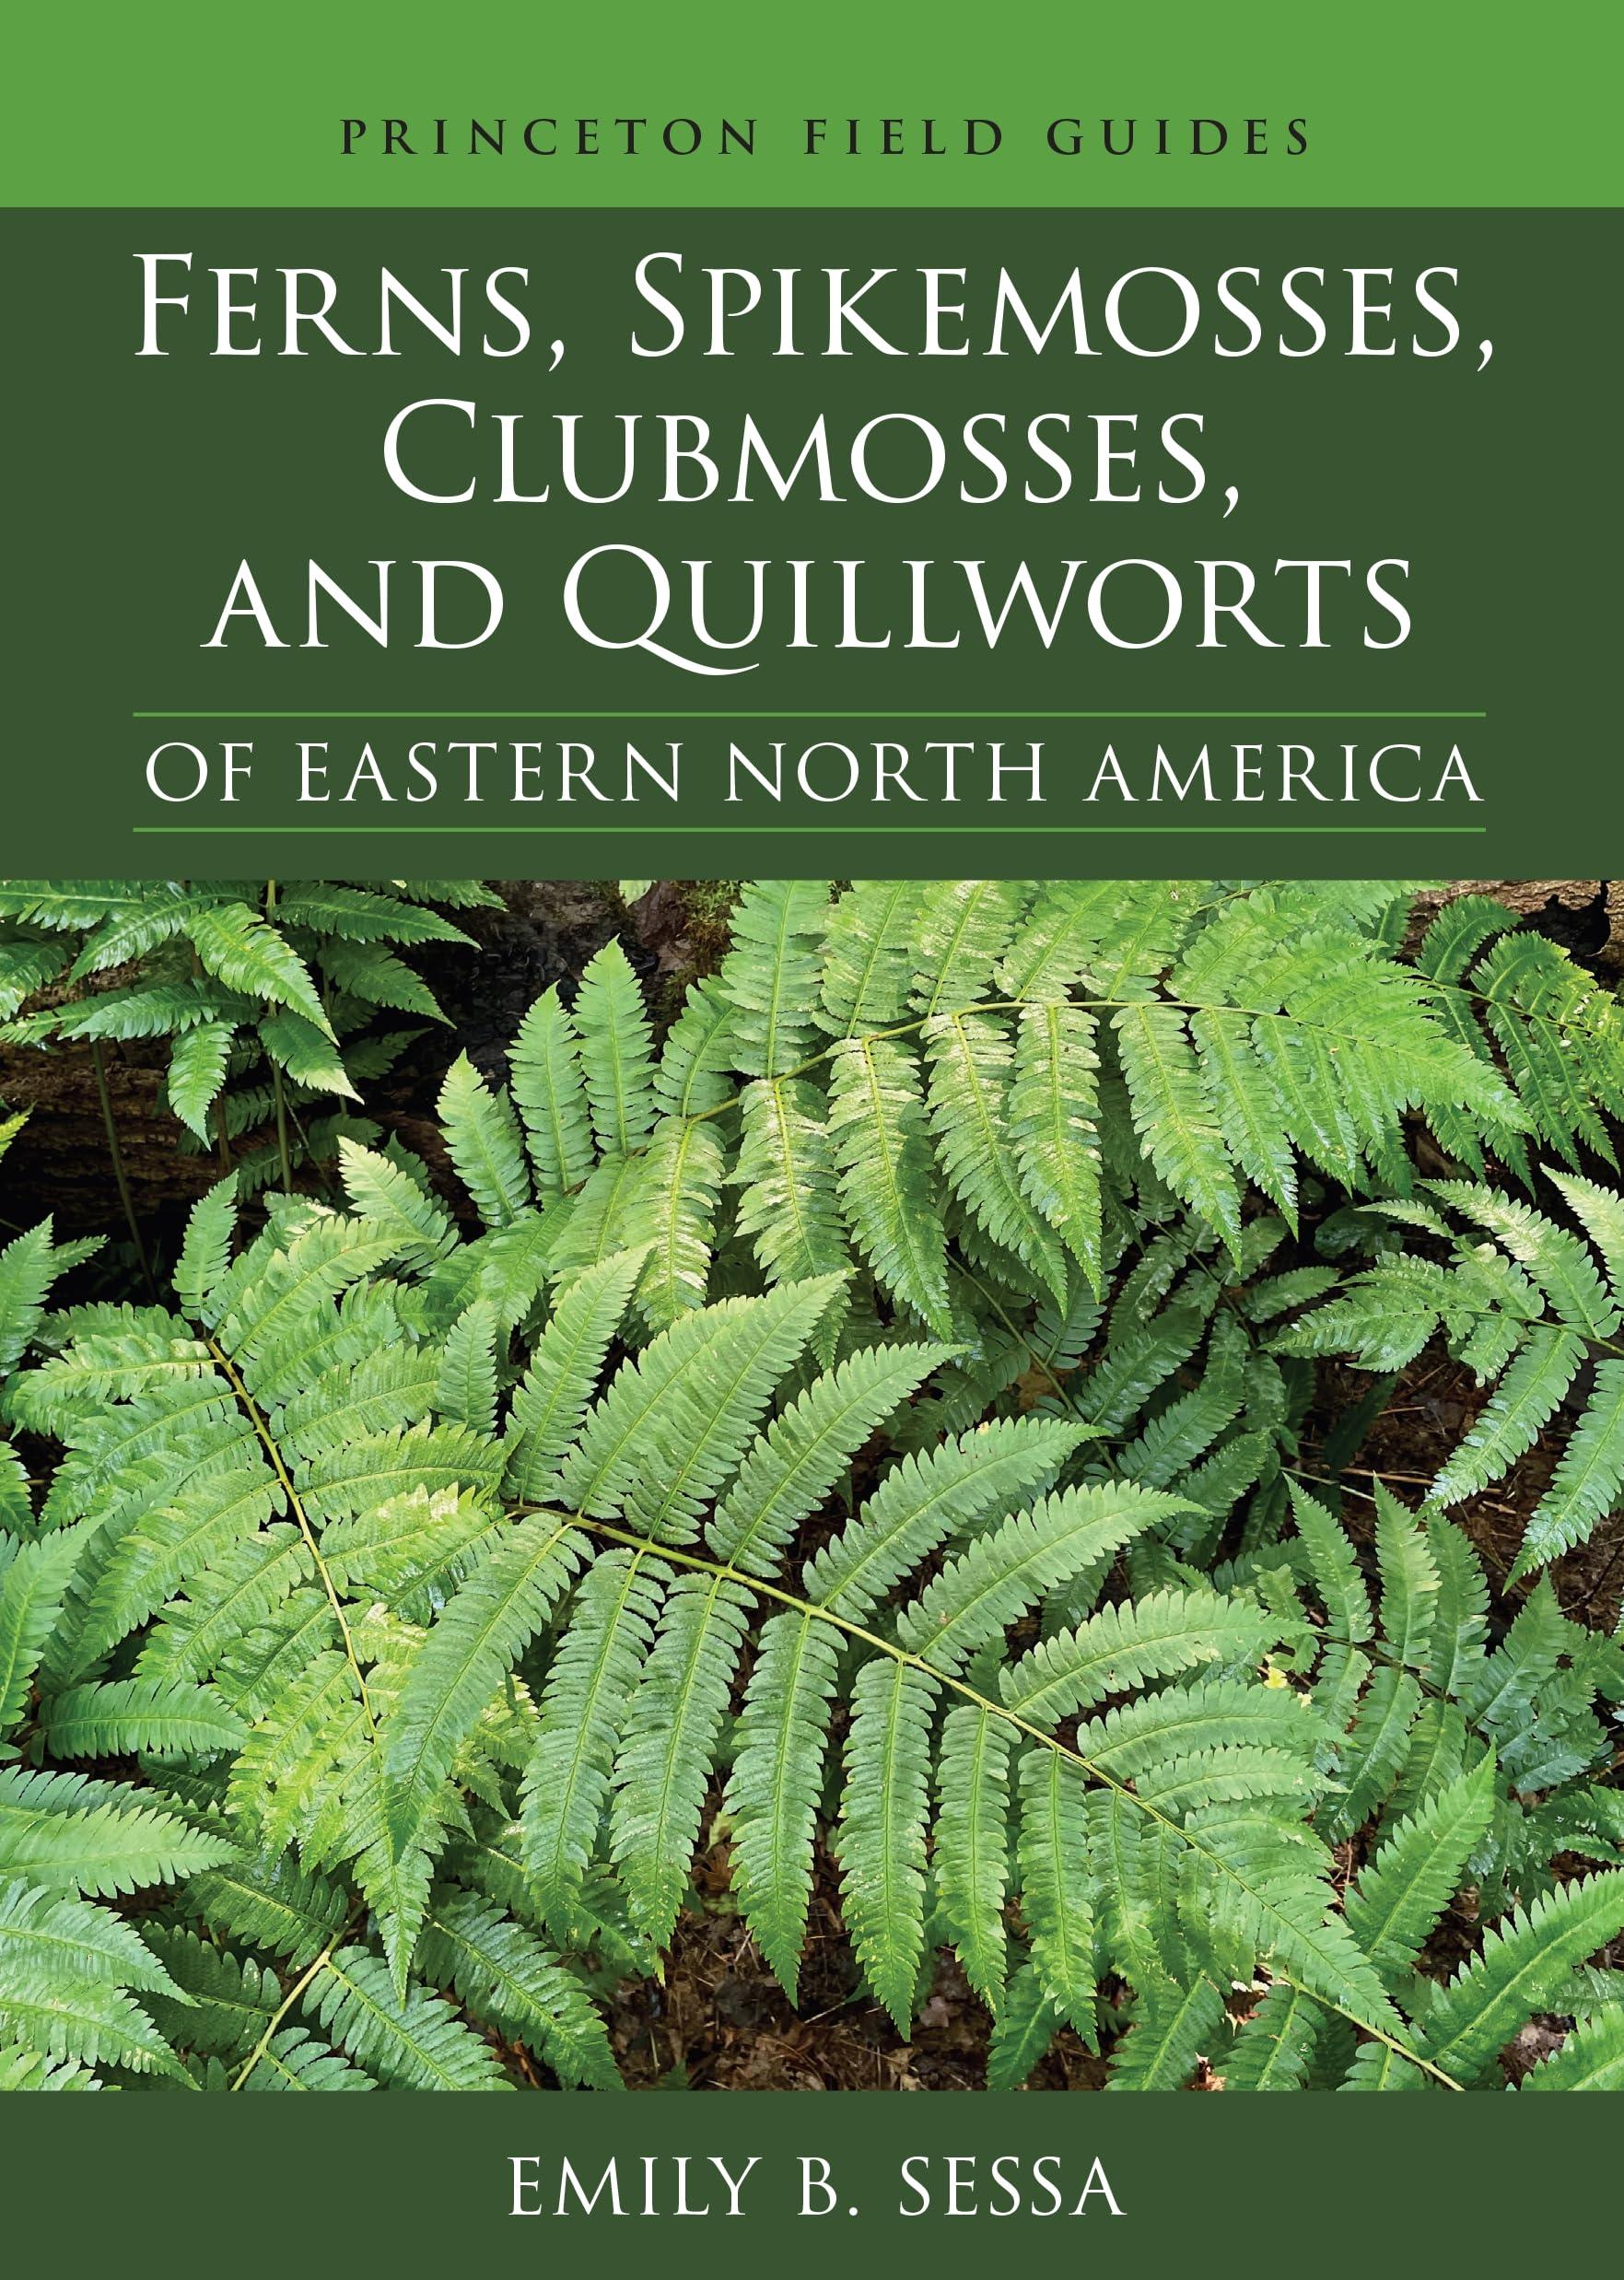 Ferns, Spikemosses, Clubmosses, and Quillworts of Eastern North America (Princeton Field Guides, 150)